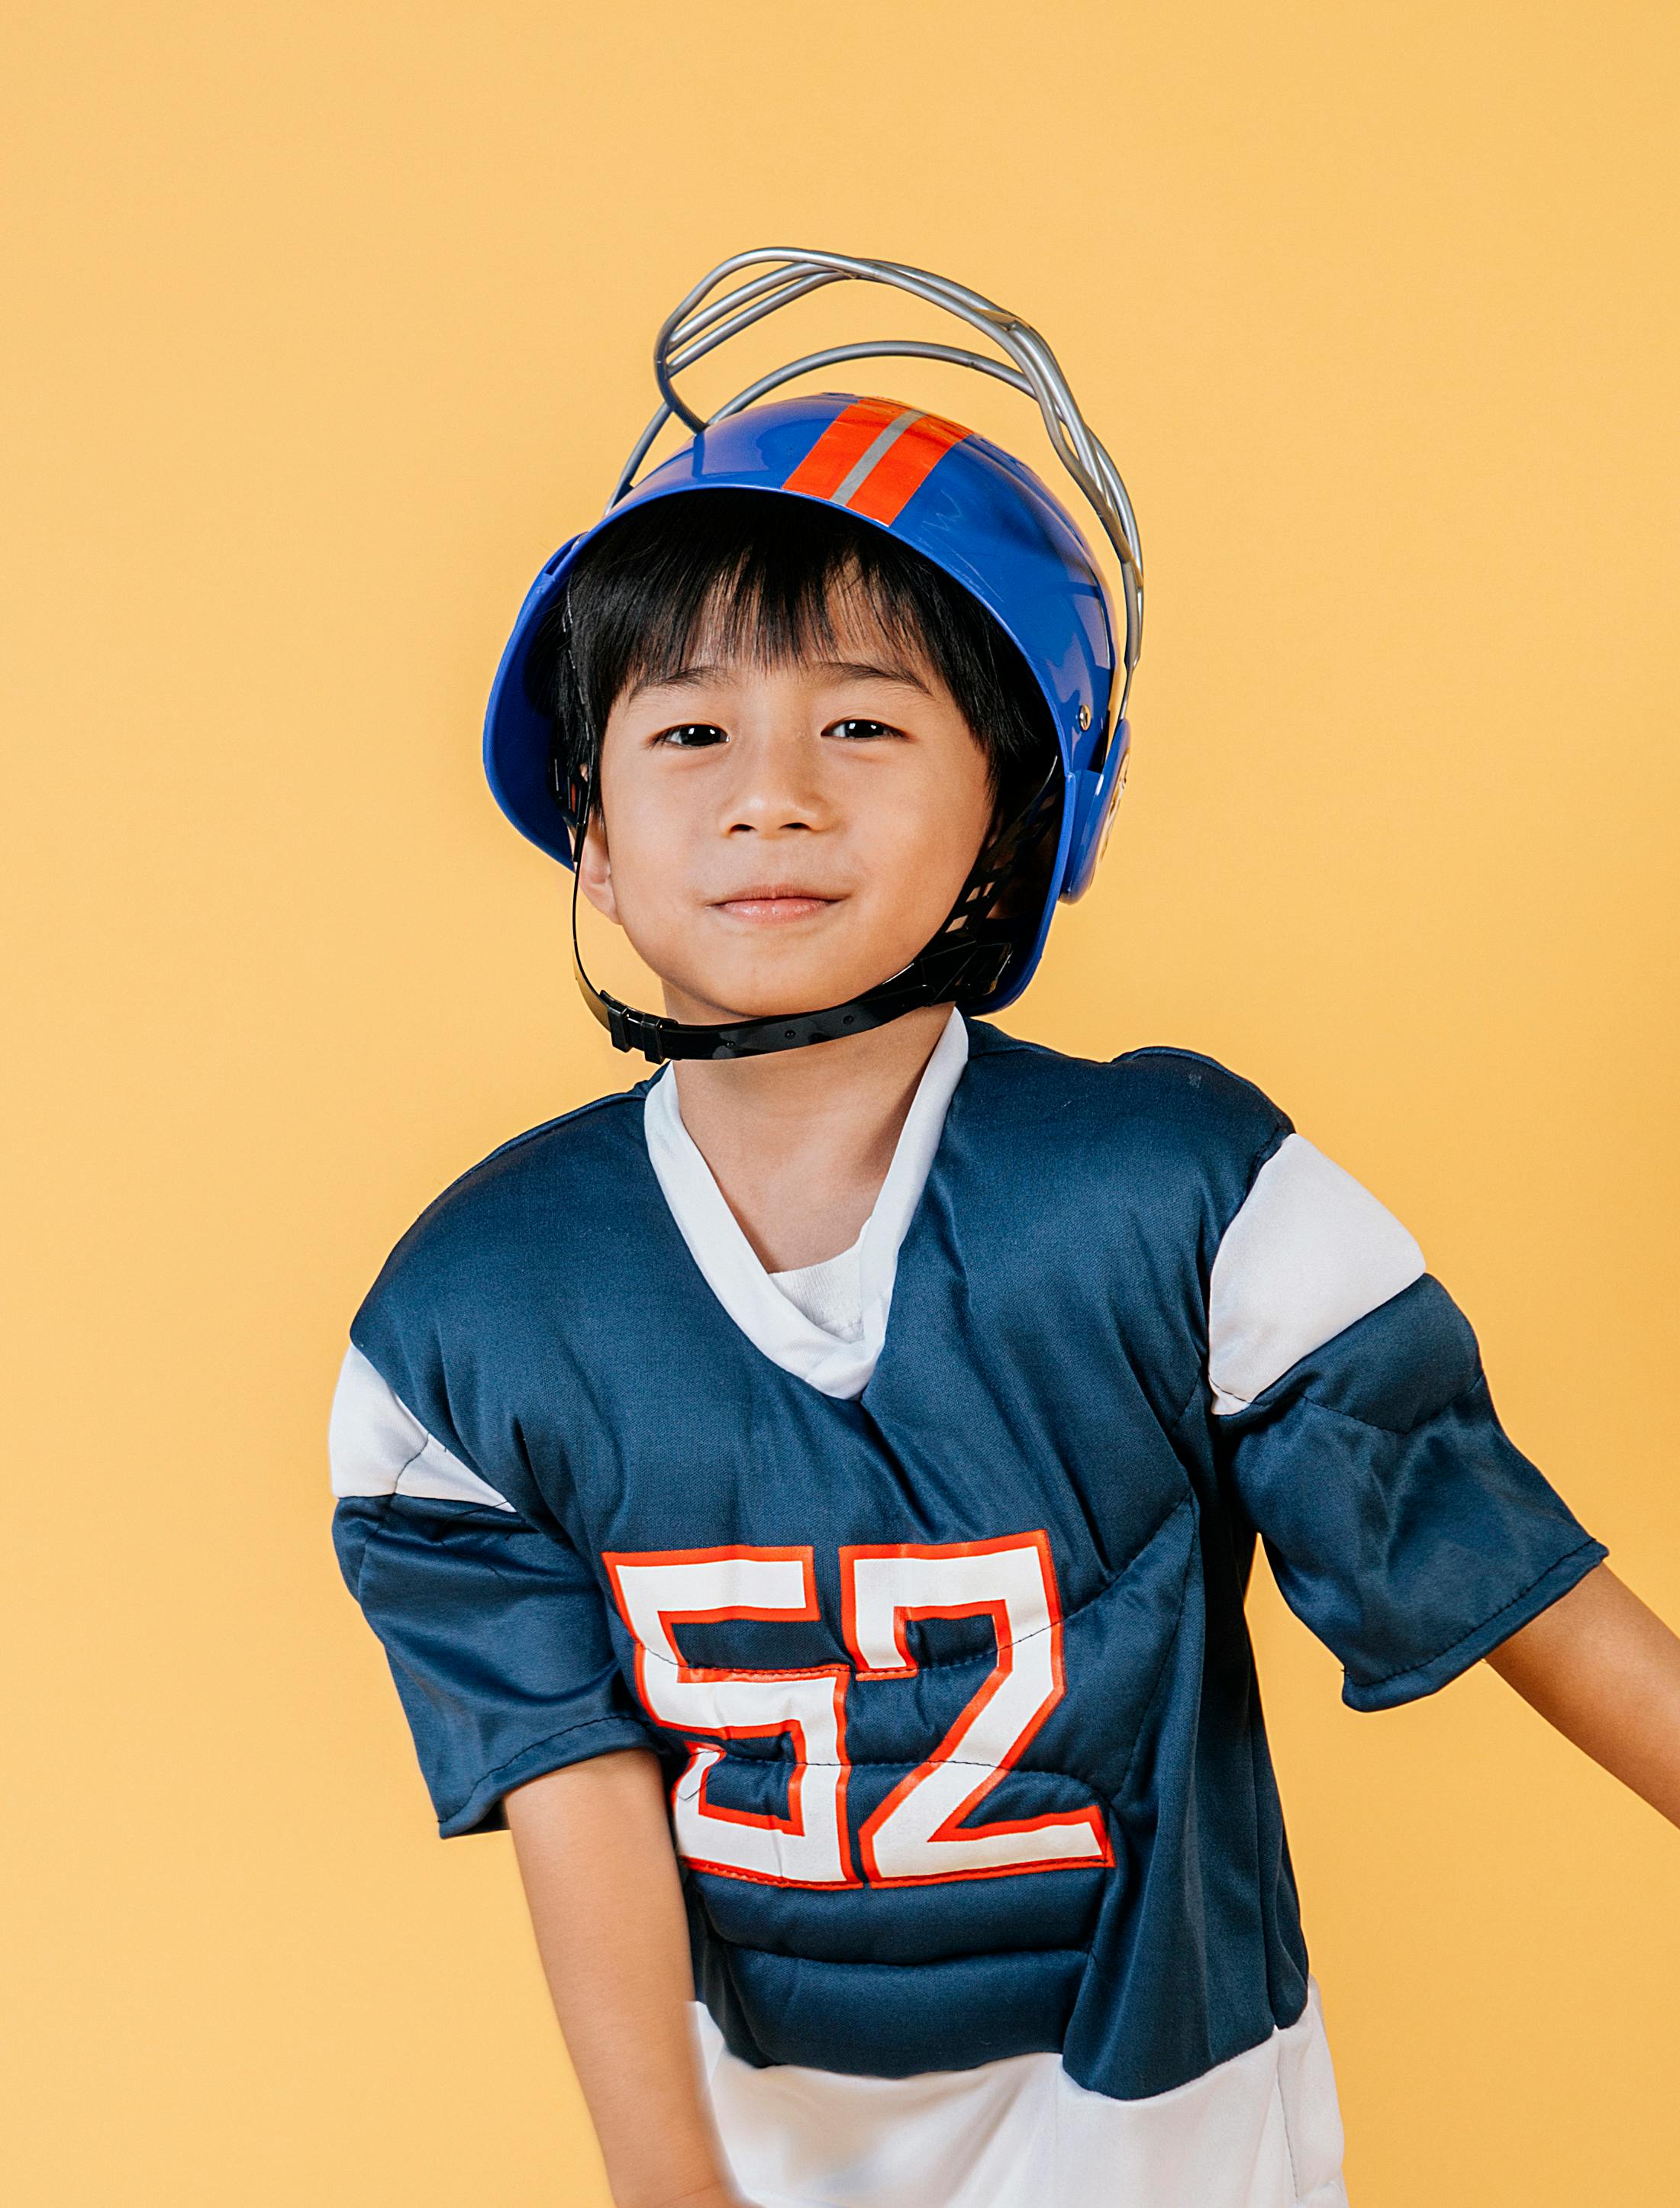 satisfied ethnic child in american football player costume and helmet